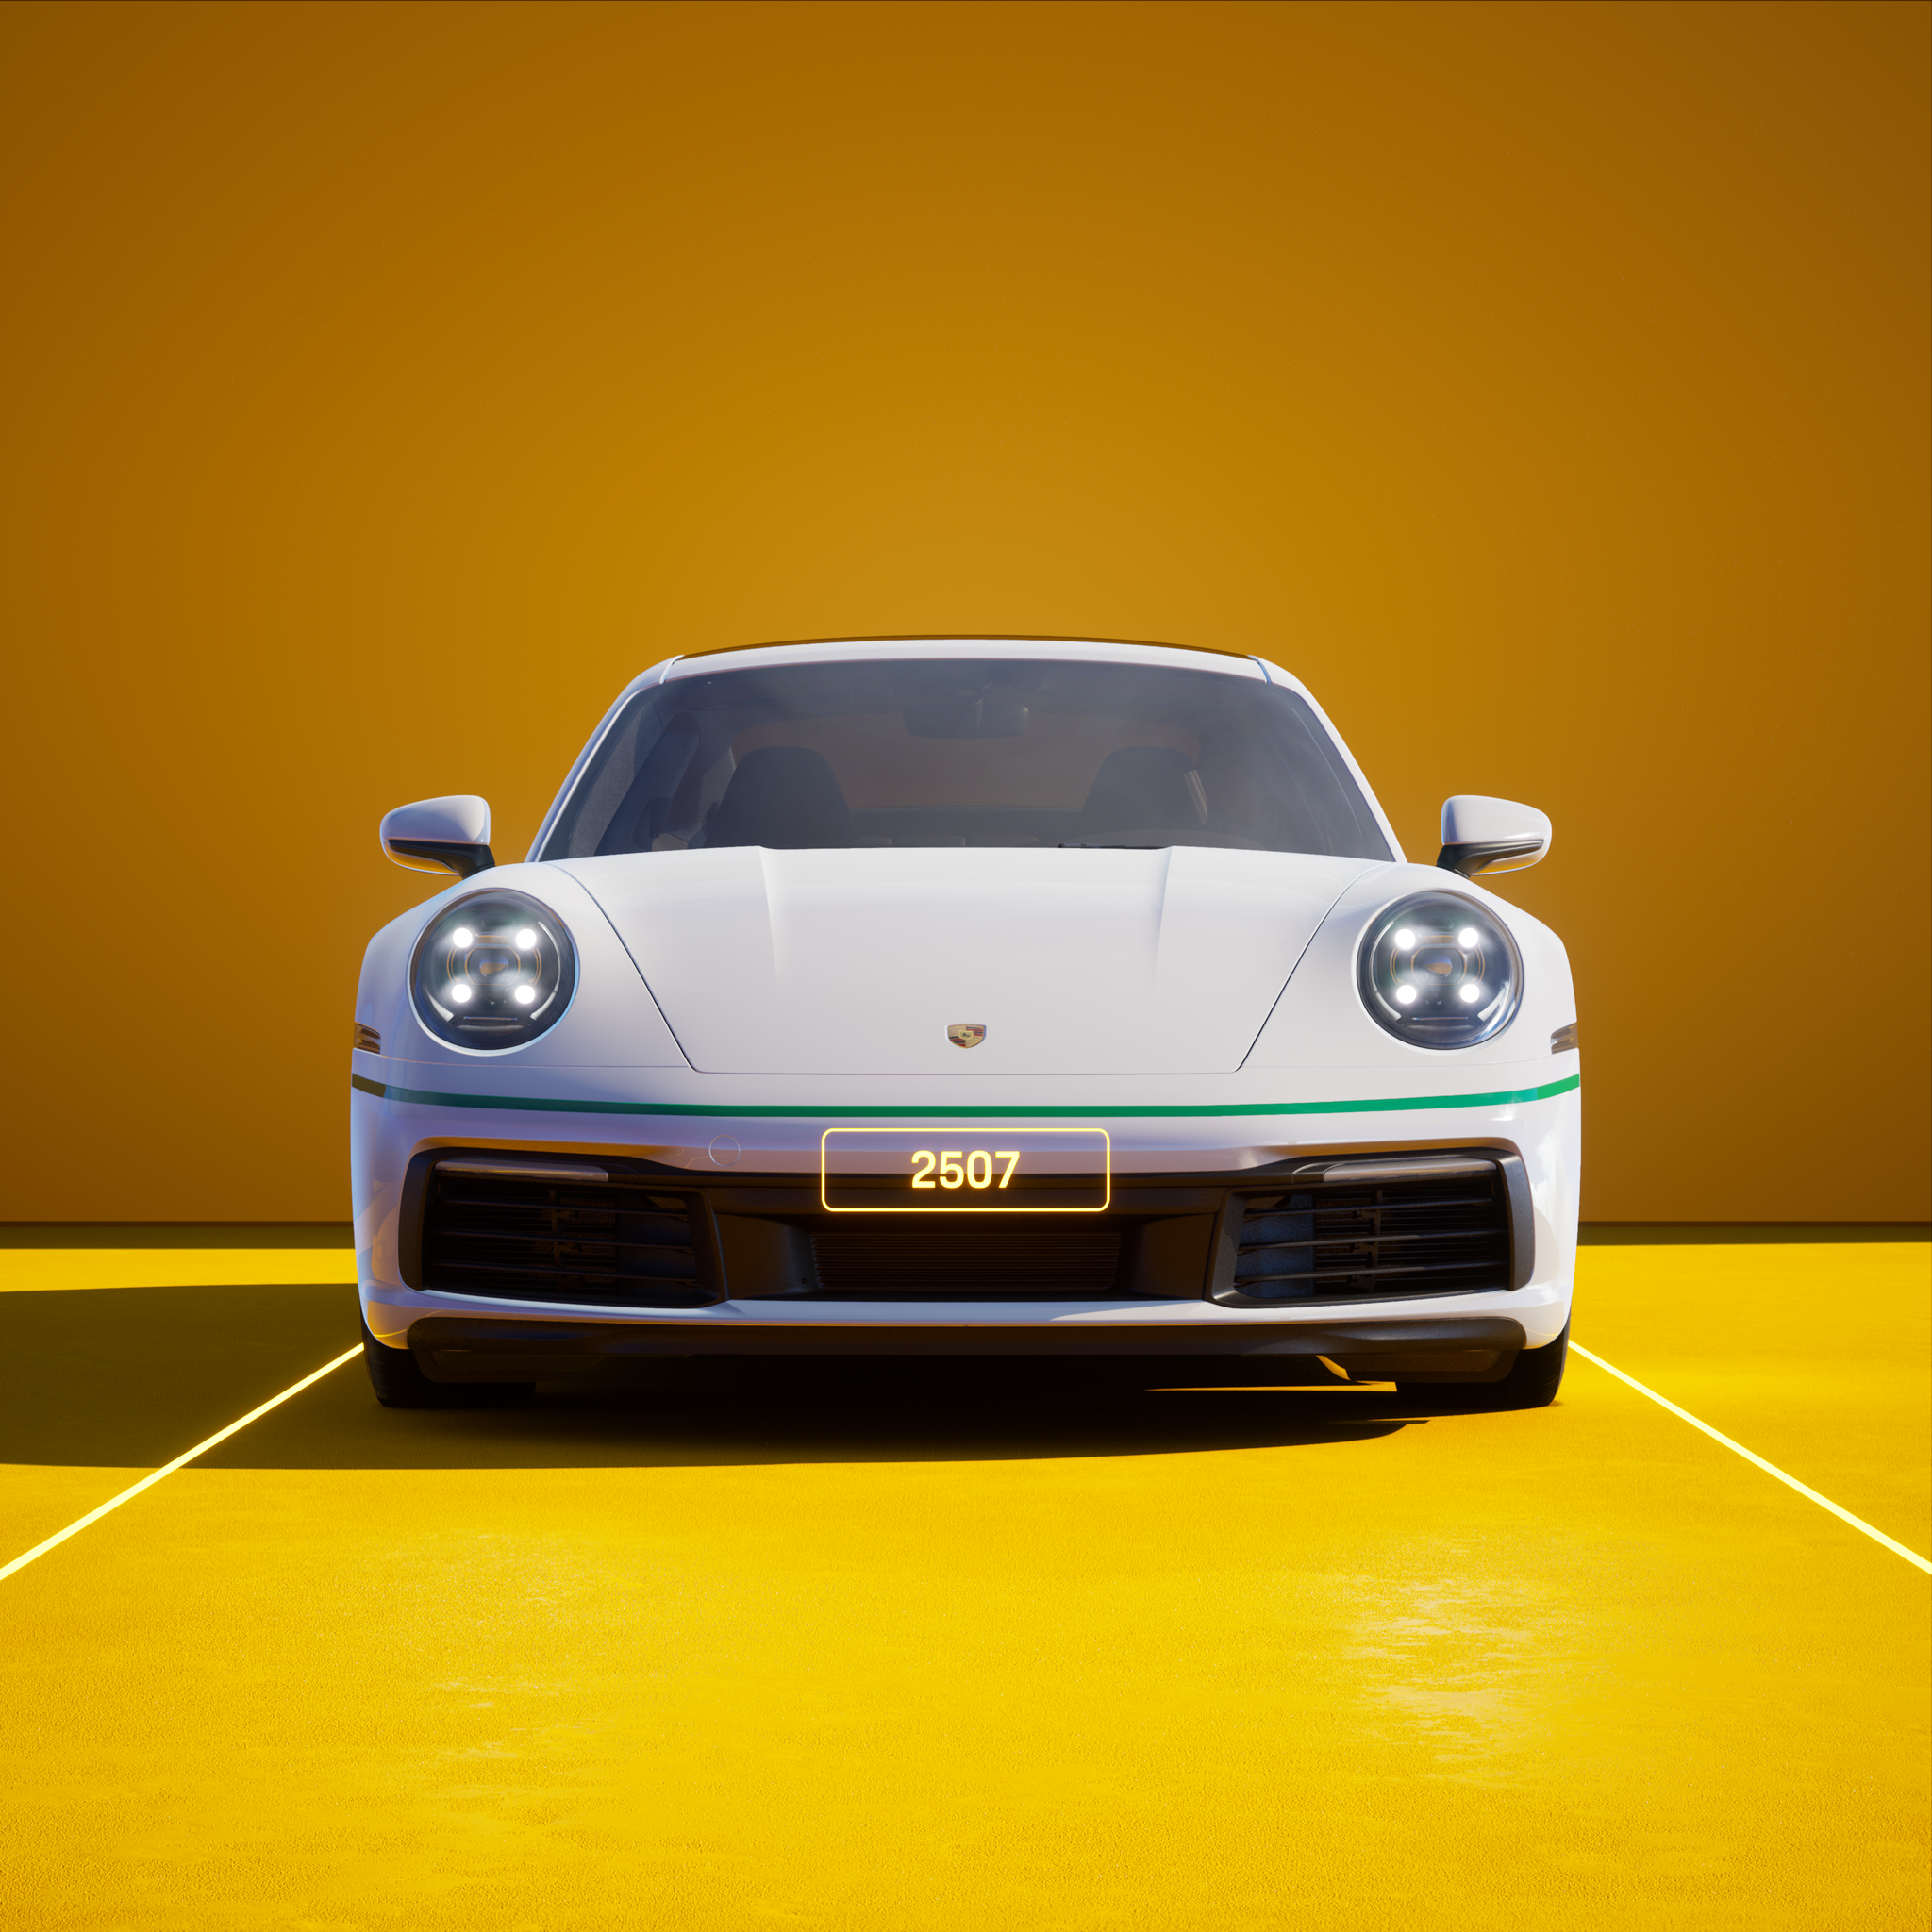 The PORSCHΞ 911 2507 image in phase